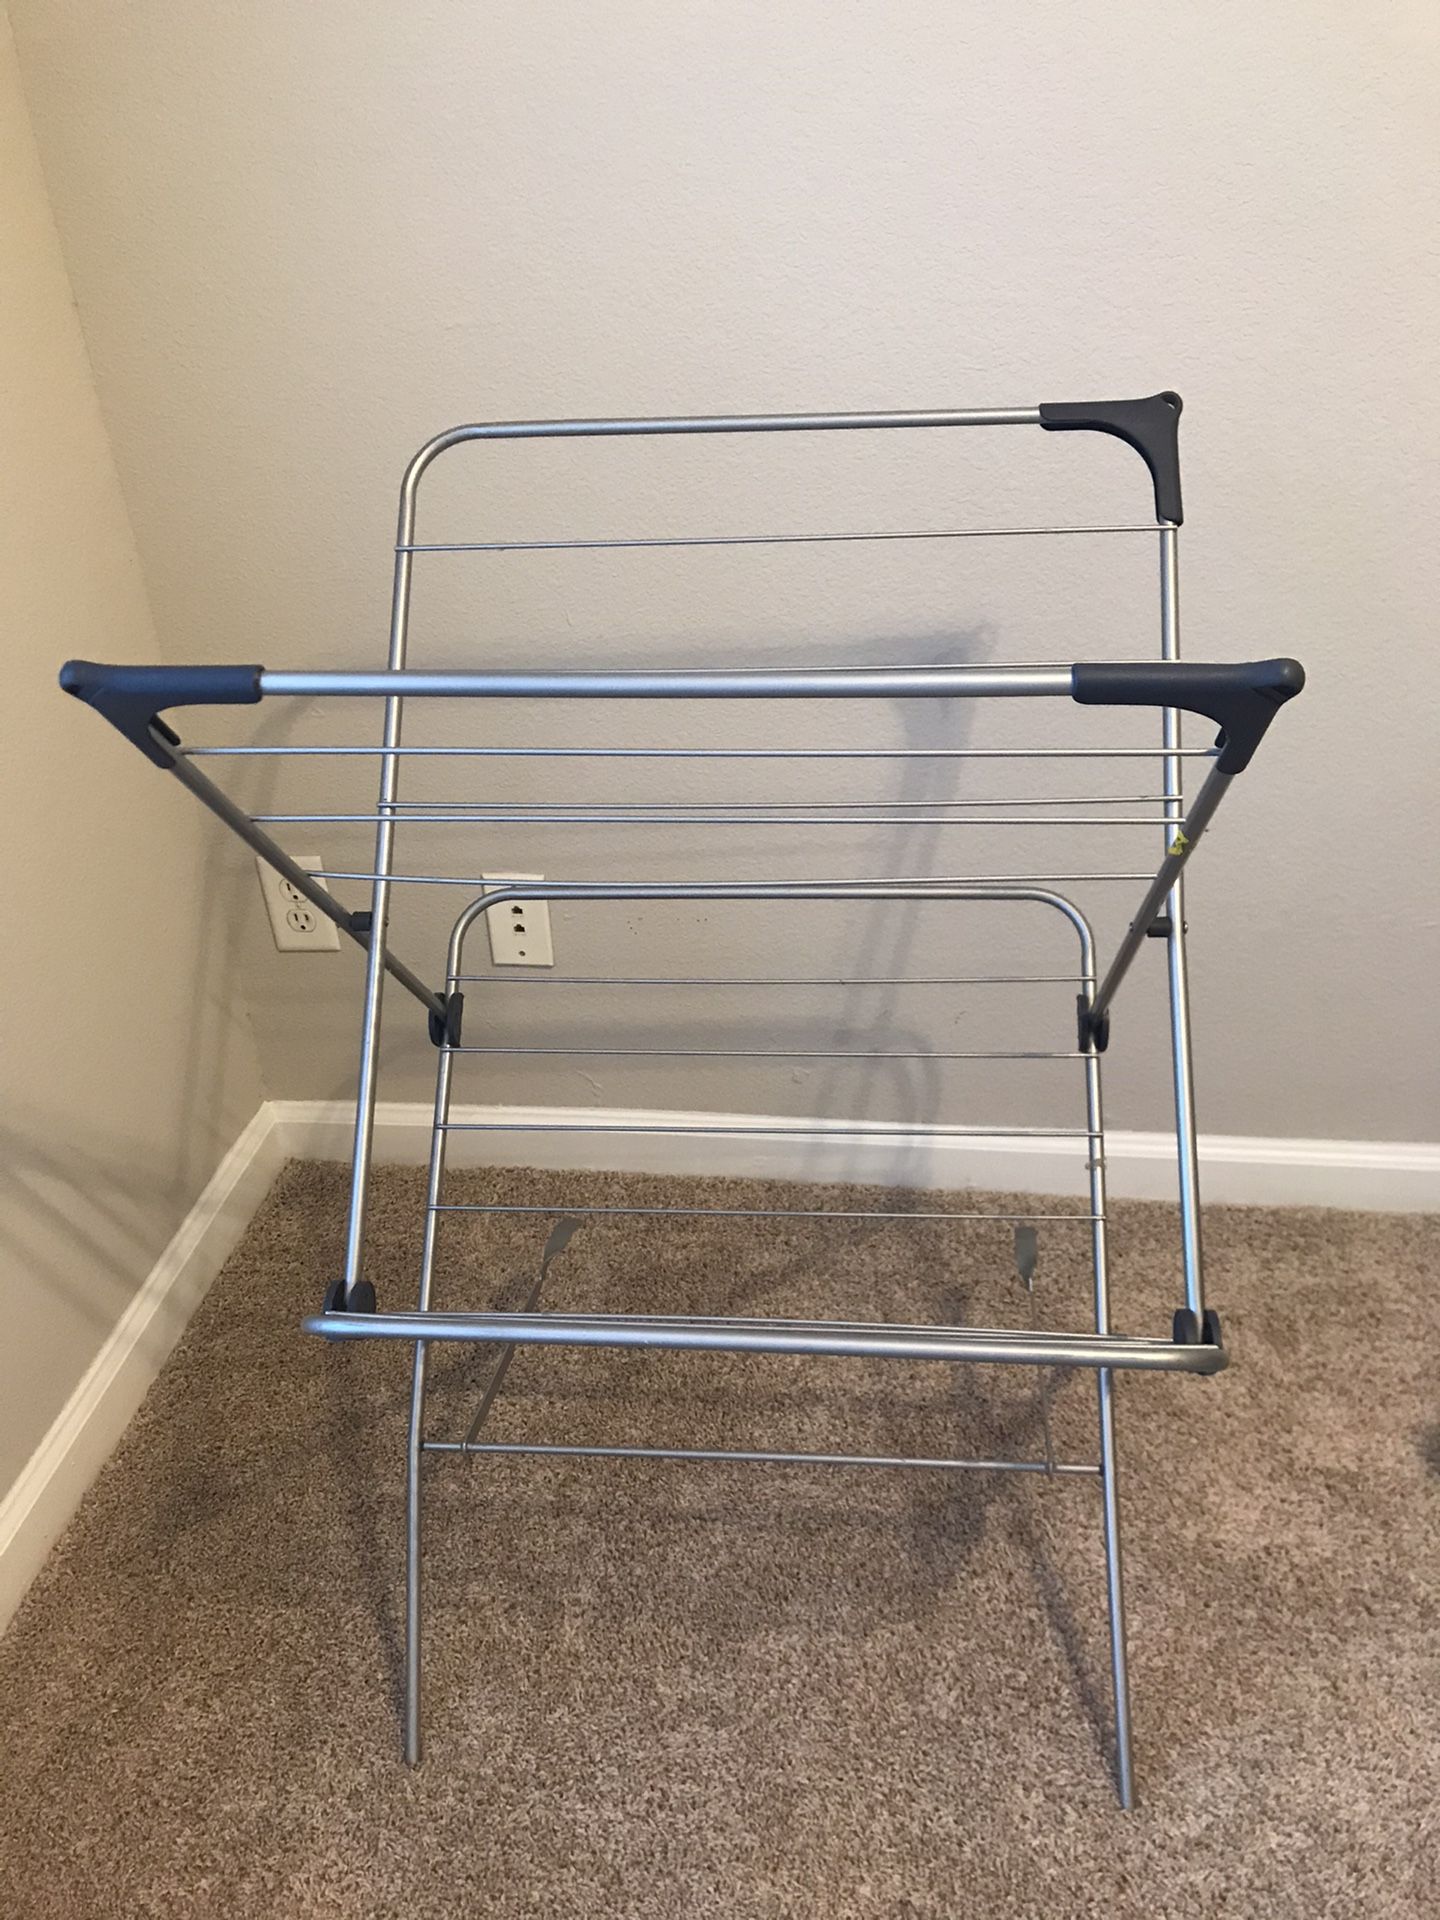 Cloth rack for hanging